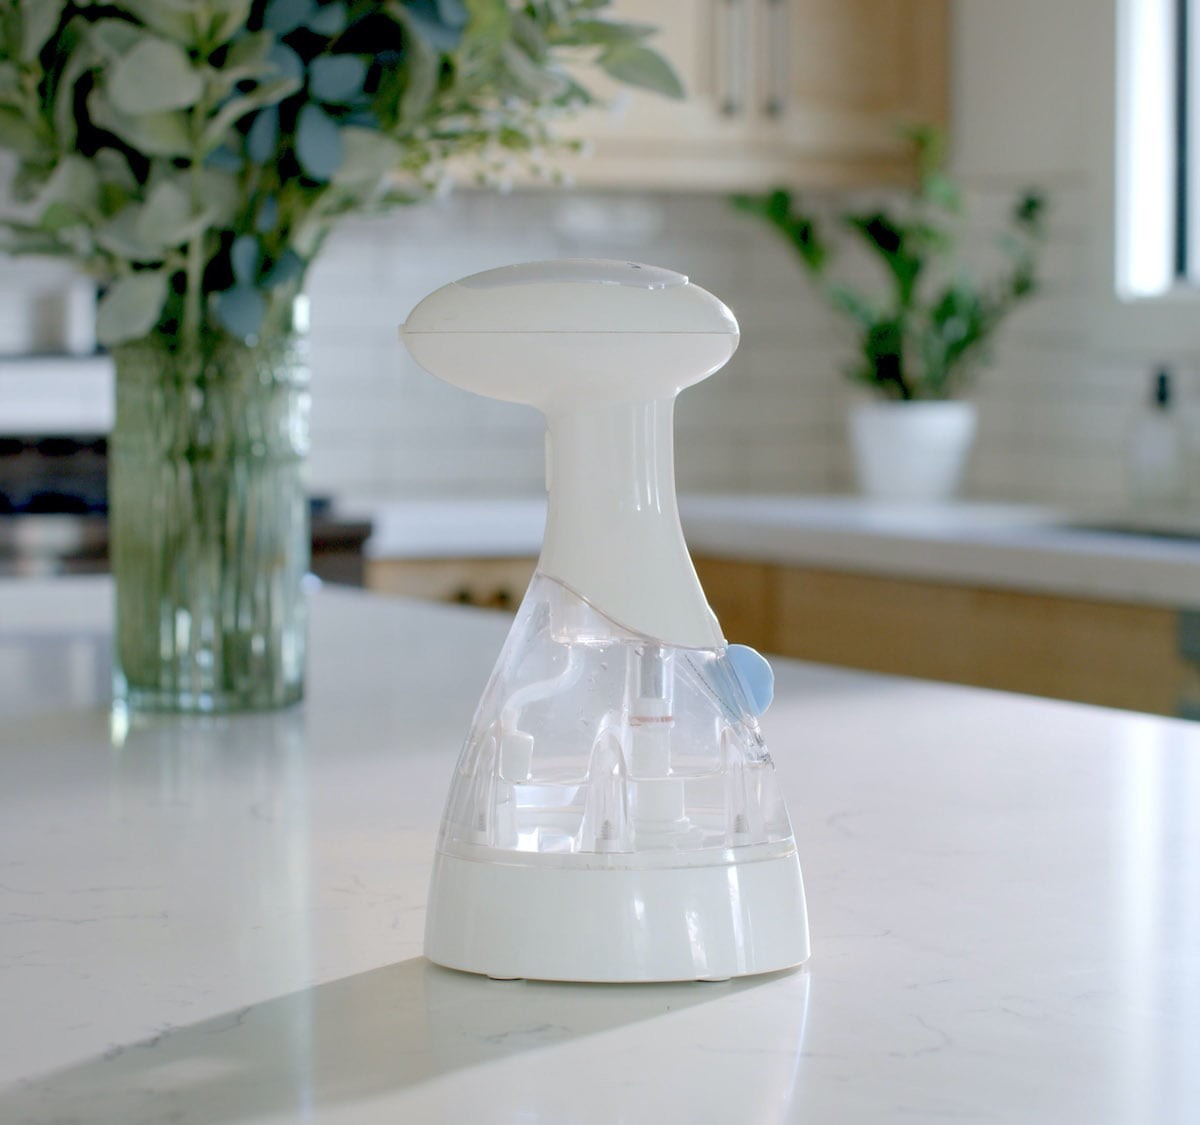 O3Waterworks Sanitizing Spray Bottle on-demand ozone cleaner works in 30 seconds